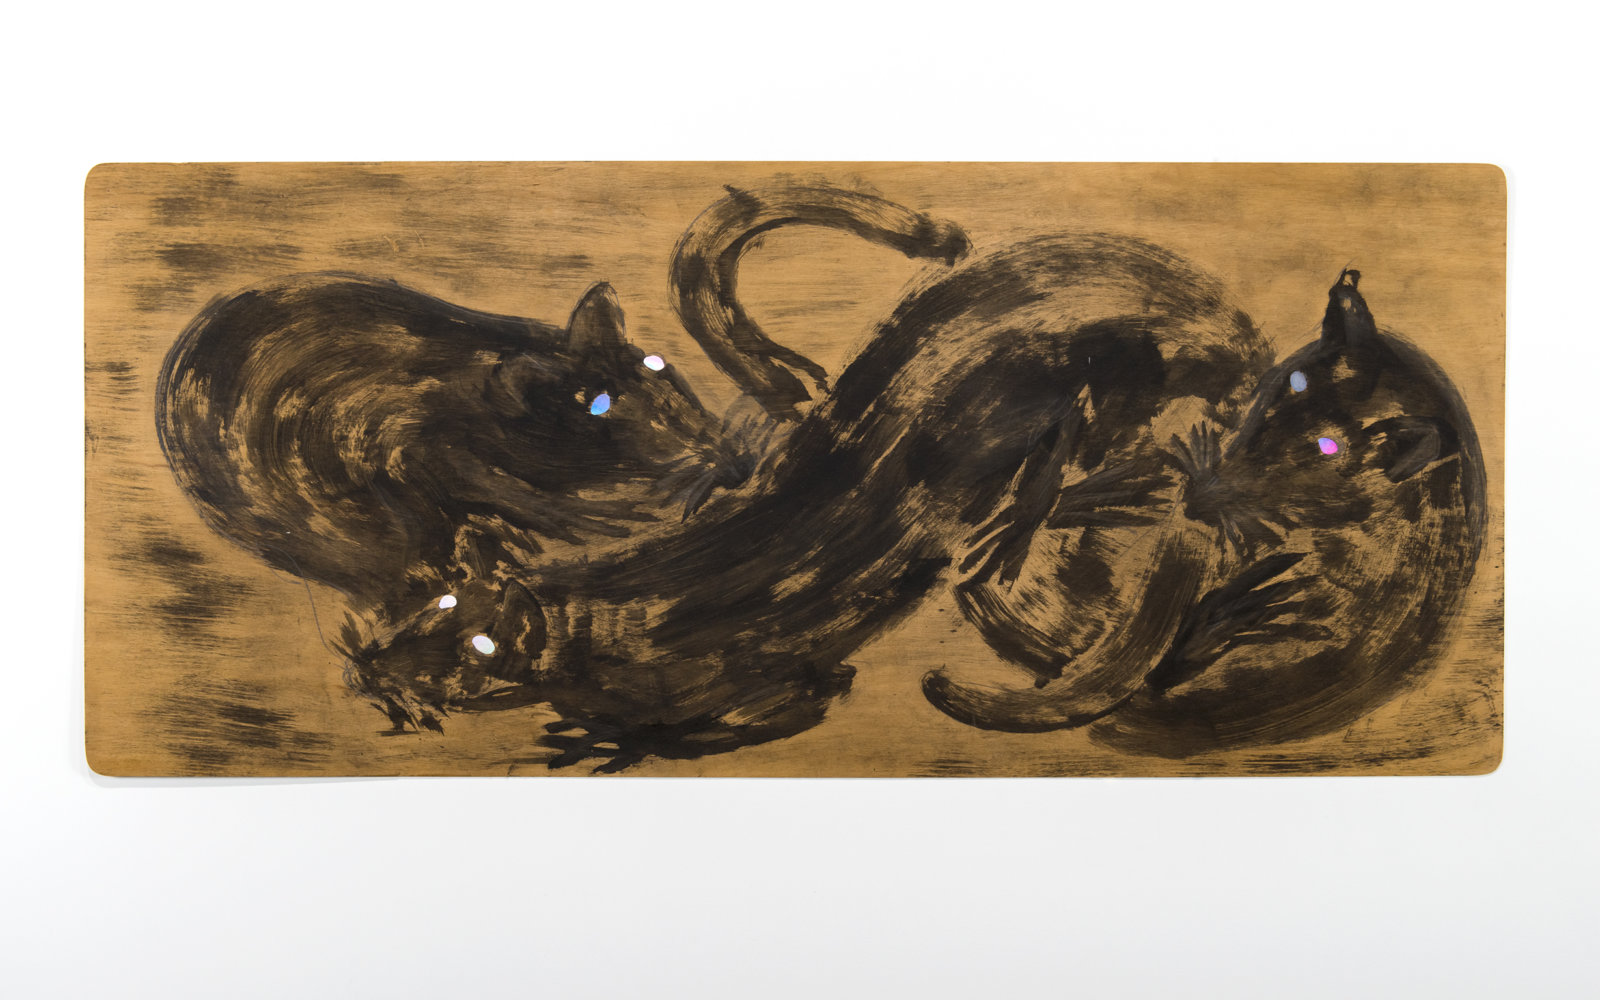 Jerry Pethick, Rat Ferrets Bercy, 1991, wood, paint, silver diffraction foil, 78 x 34 in. (198 x 86 cm)